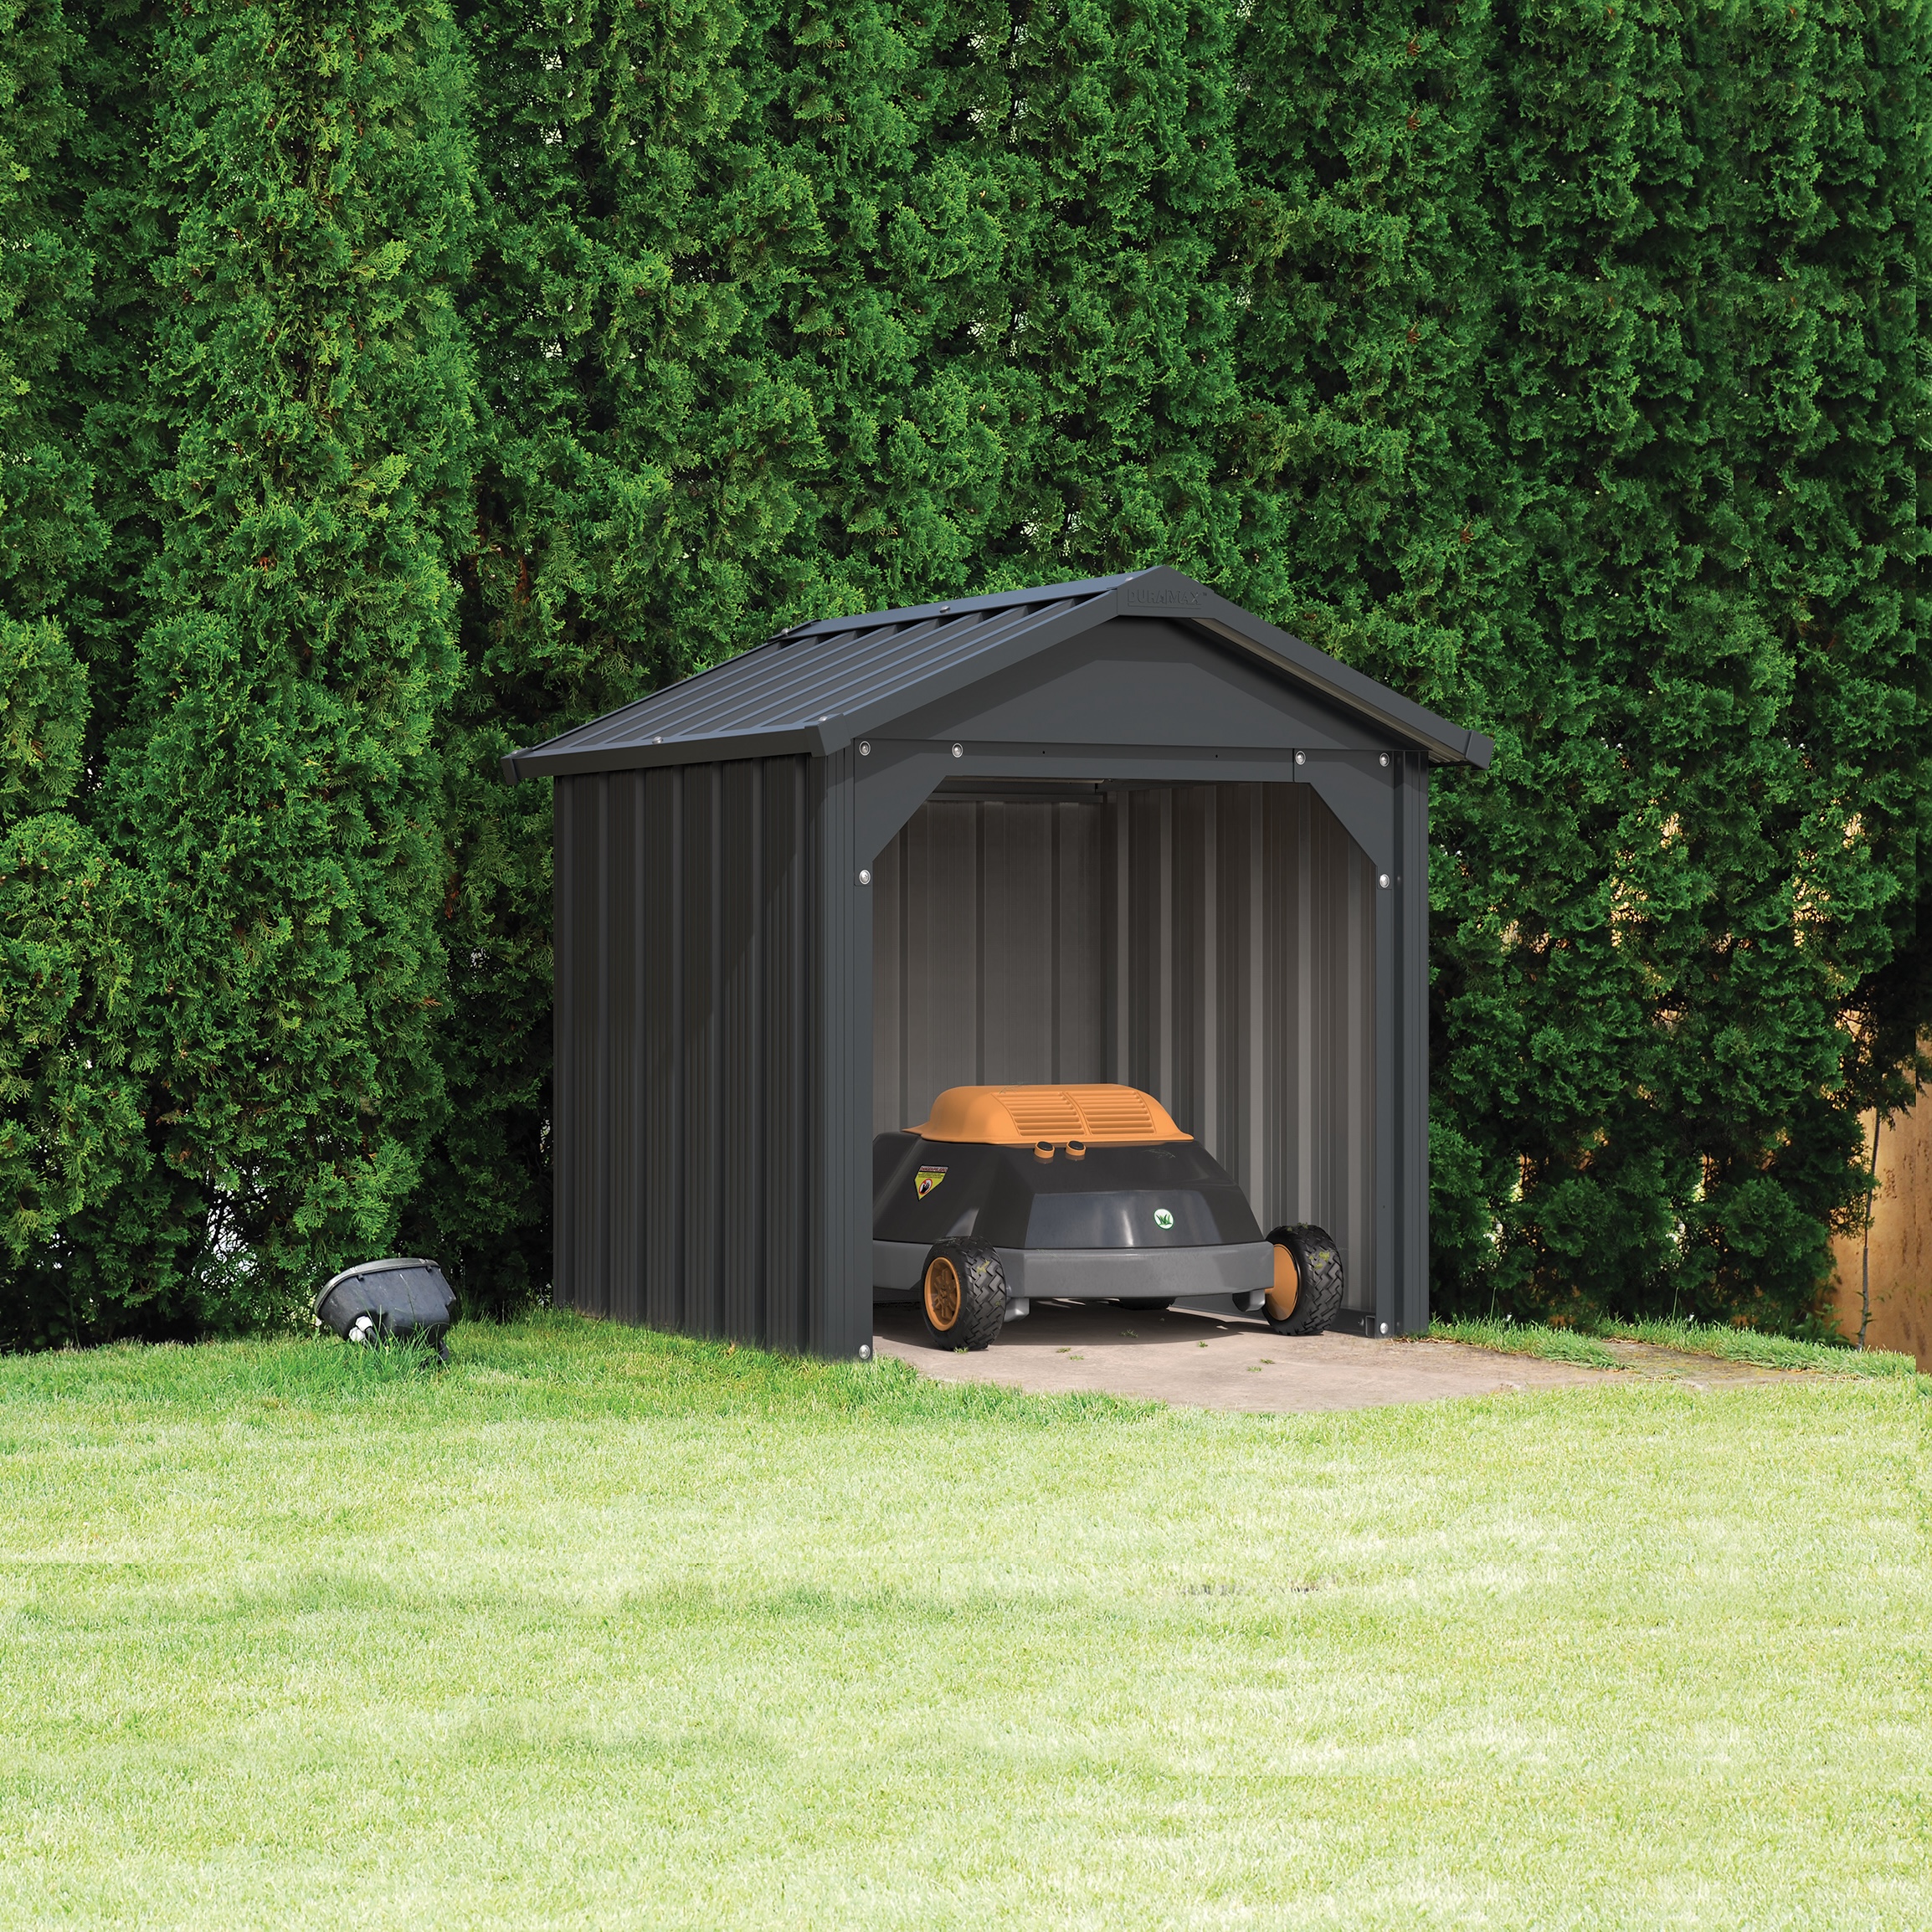 Robotic Lawn Mower Shed